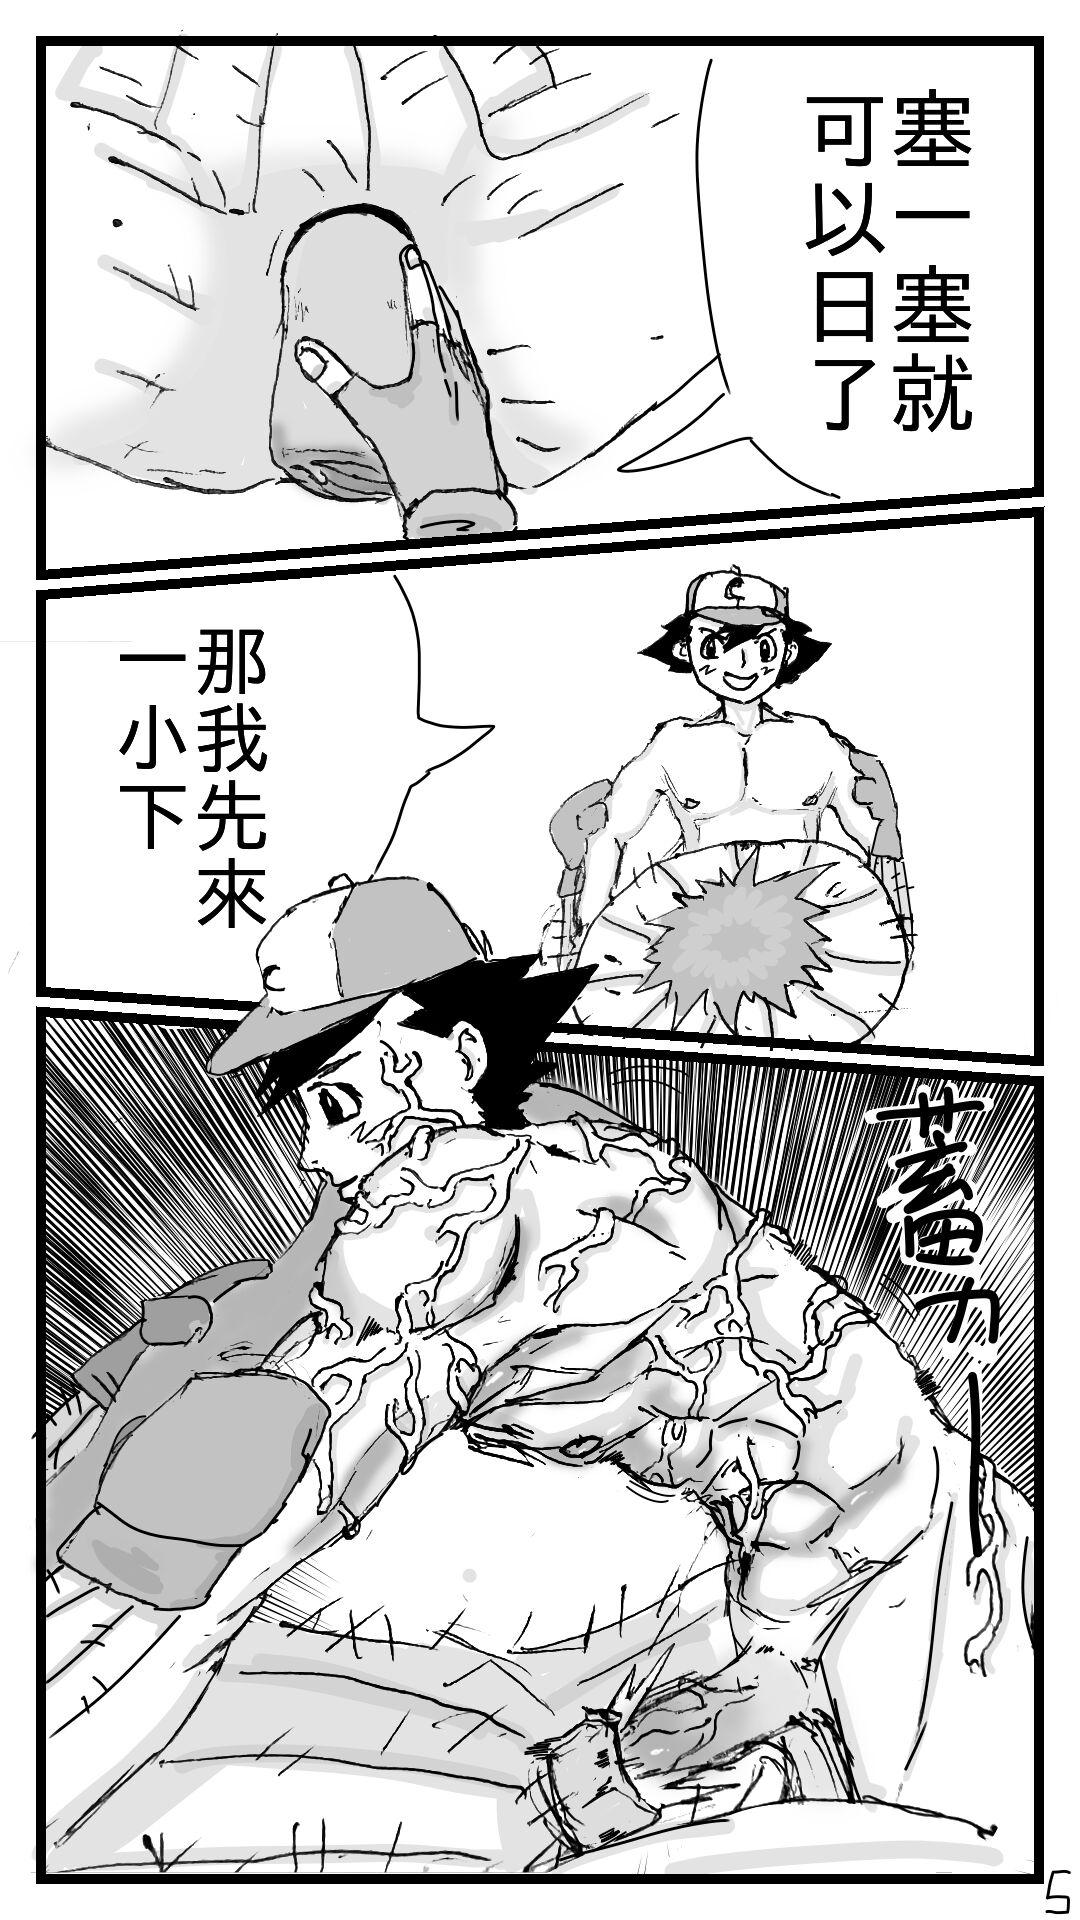 Facesitting 小智大战仙人掌兽 - Digimon Pokemon | pocket monsters Young Tits - Page 5